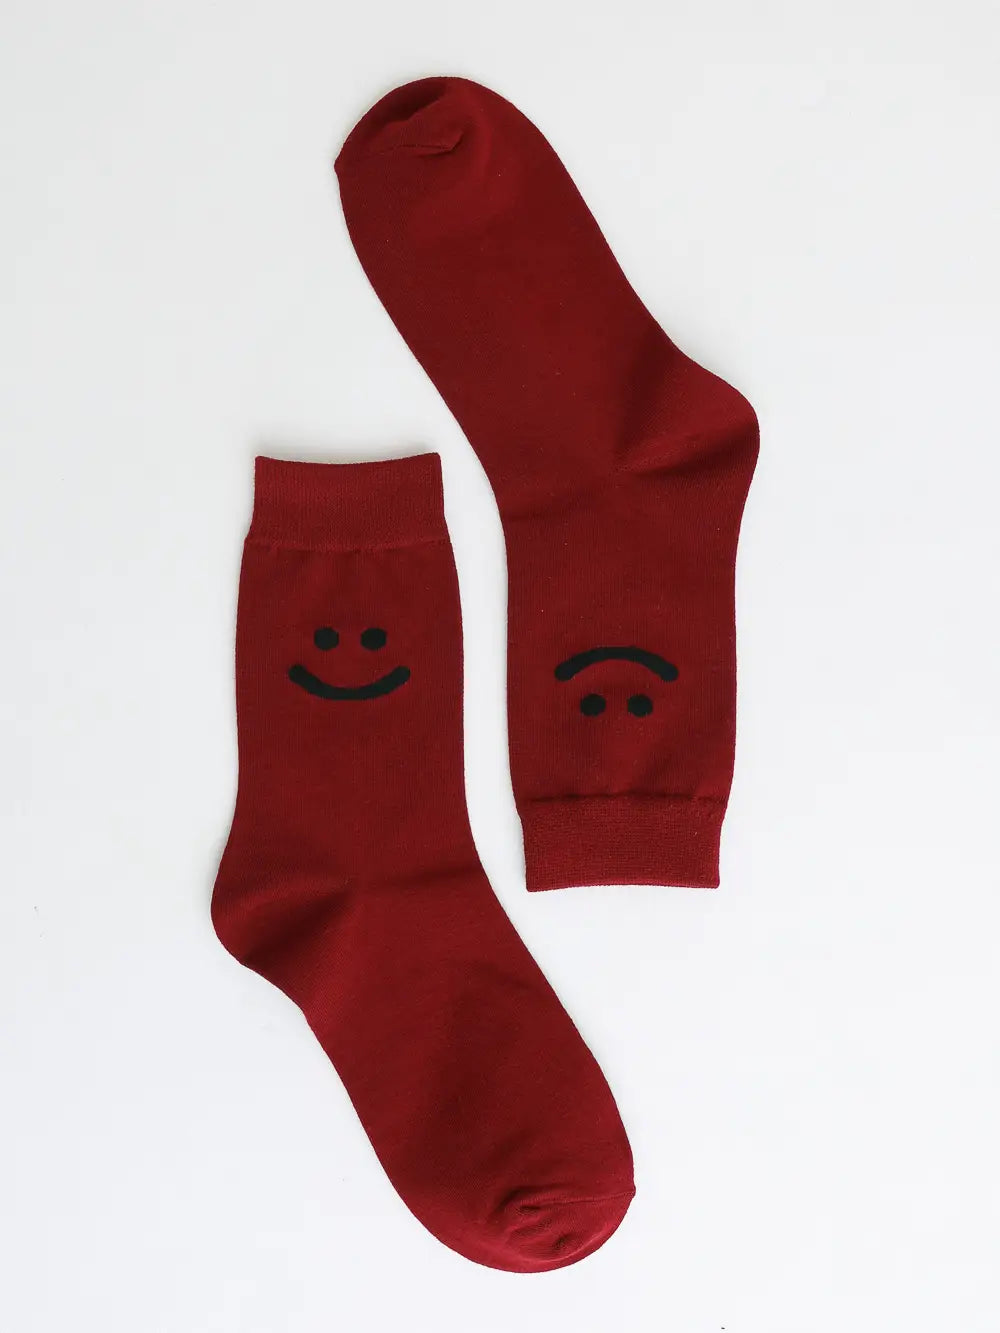 The SMILEY Face Sock